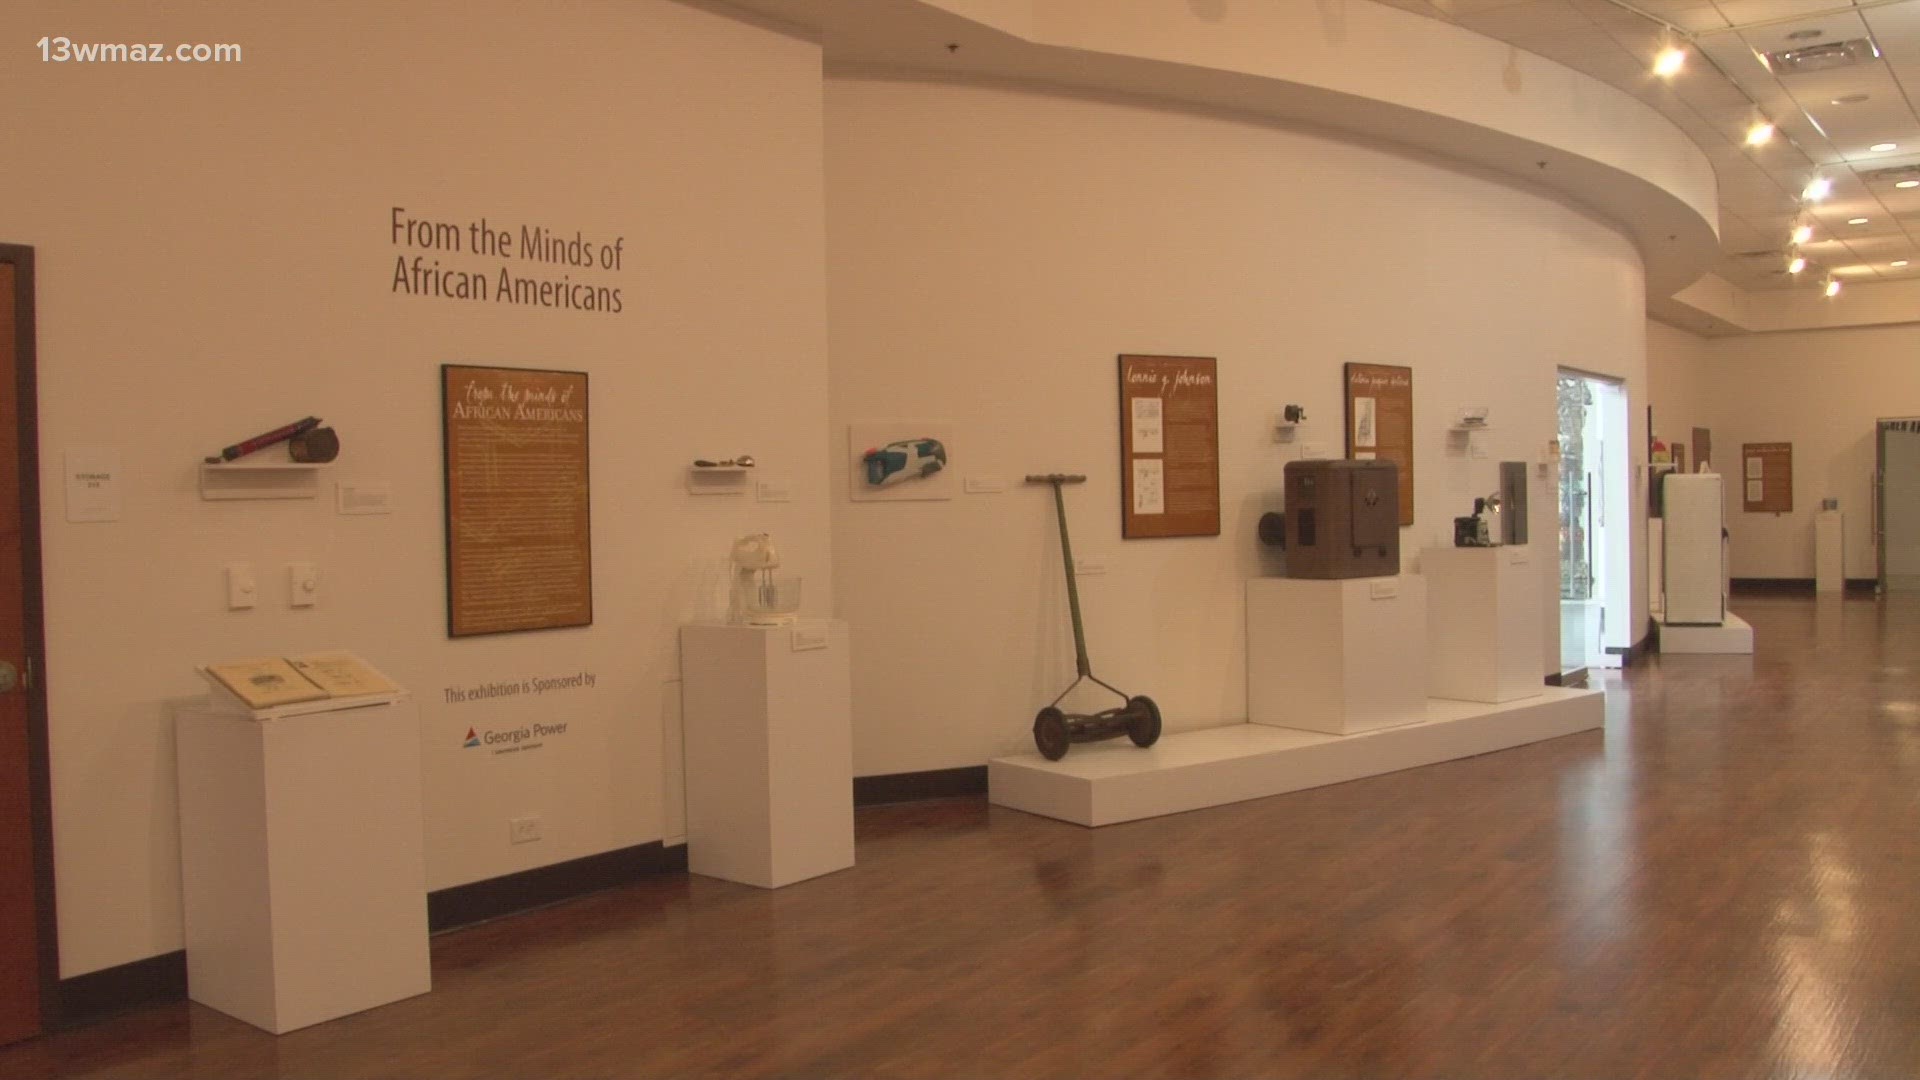 "The Enslaved People Project" displays documents detailing slave transactions in Macon during the 19th century.